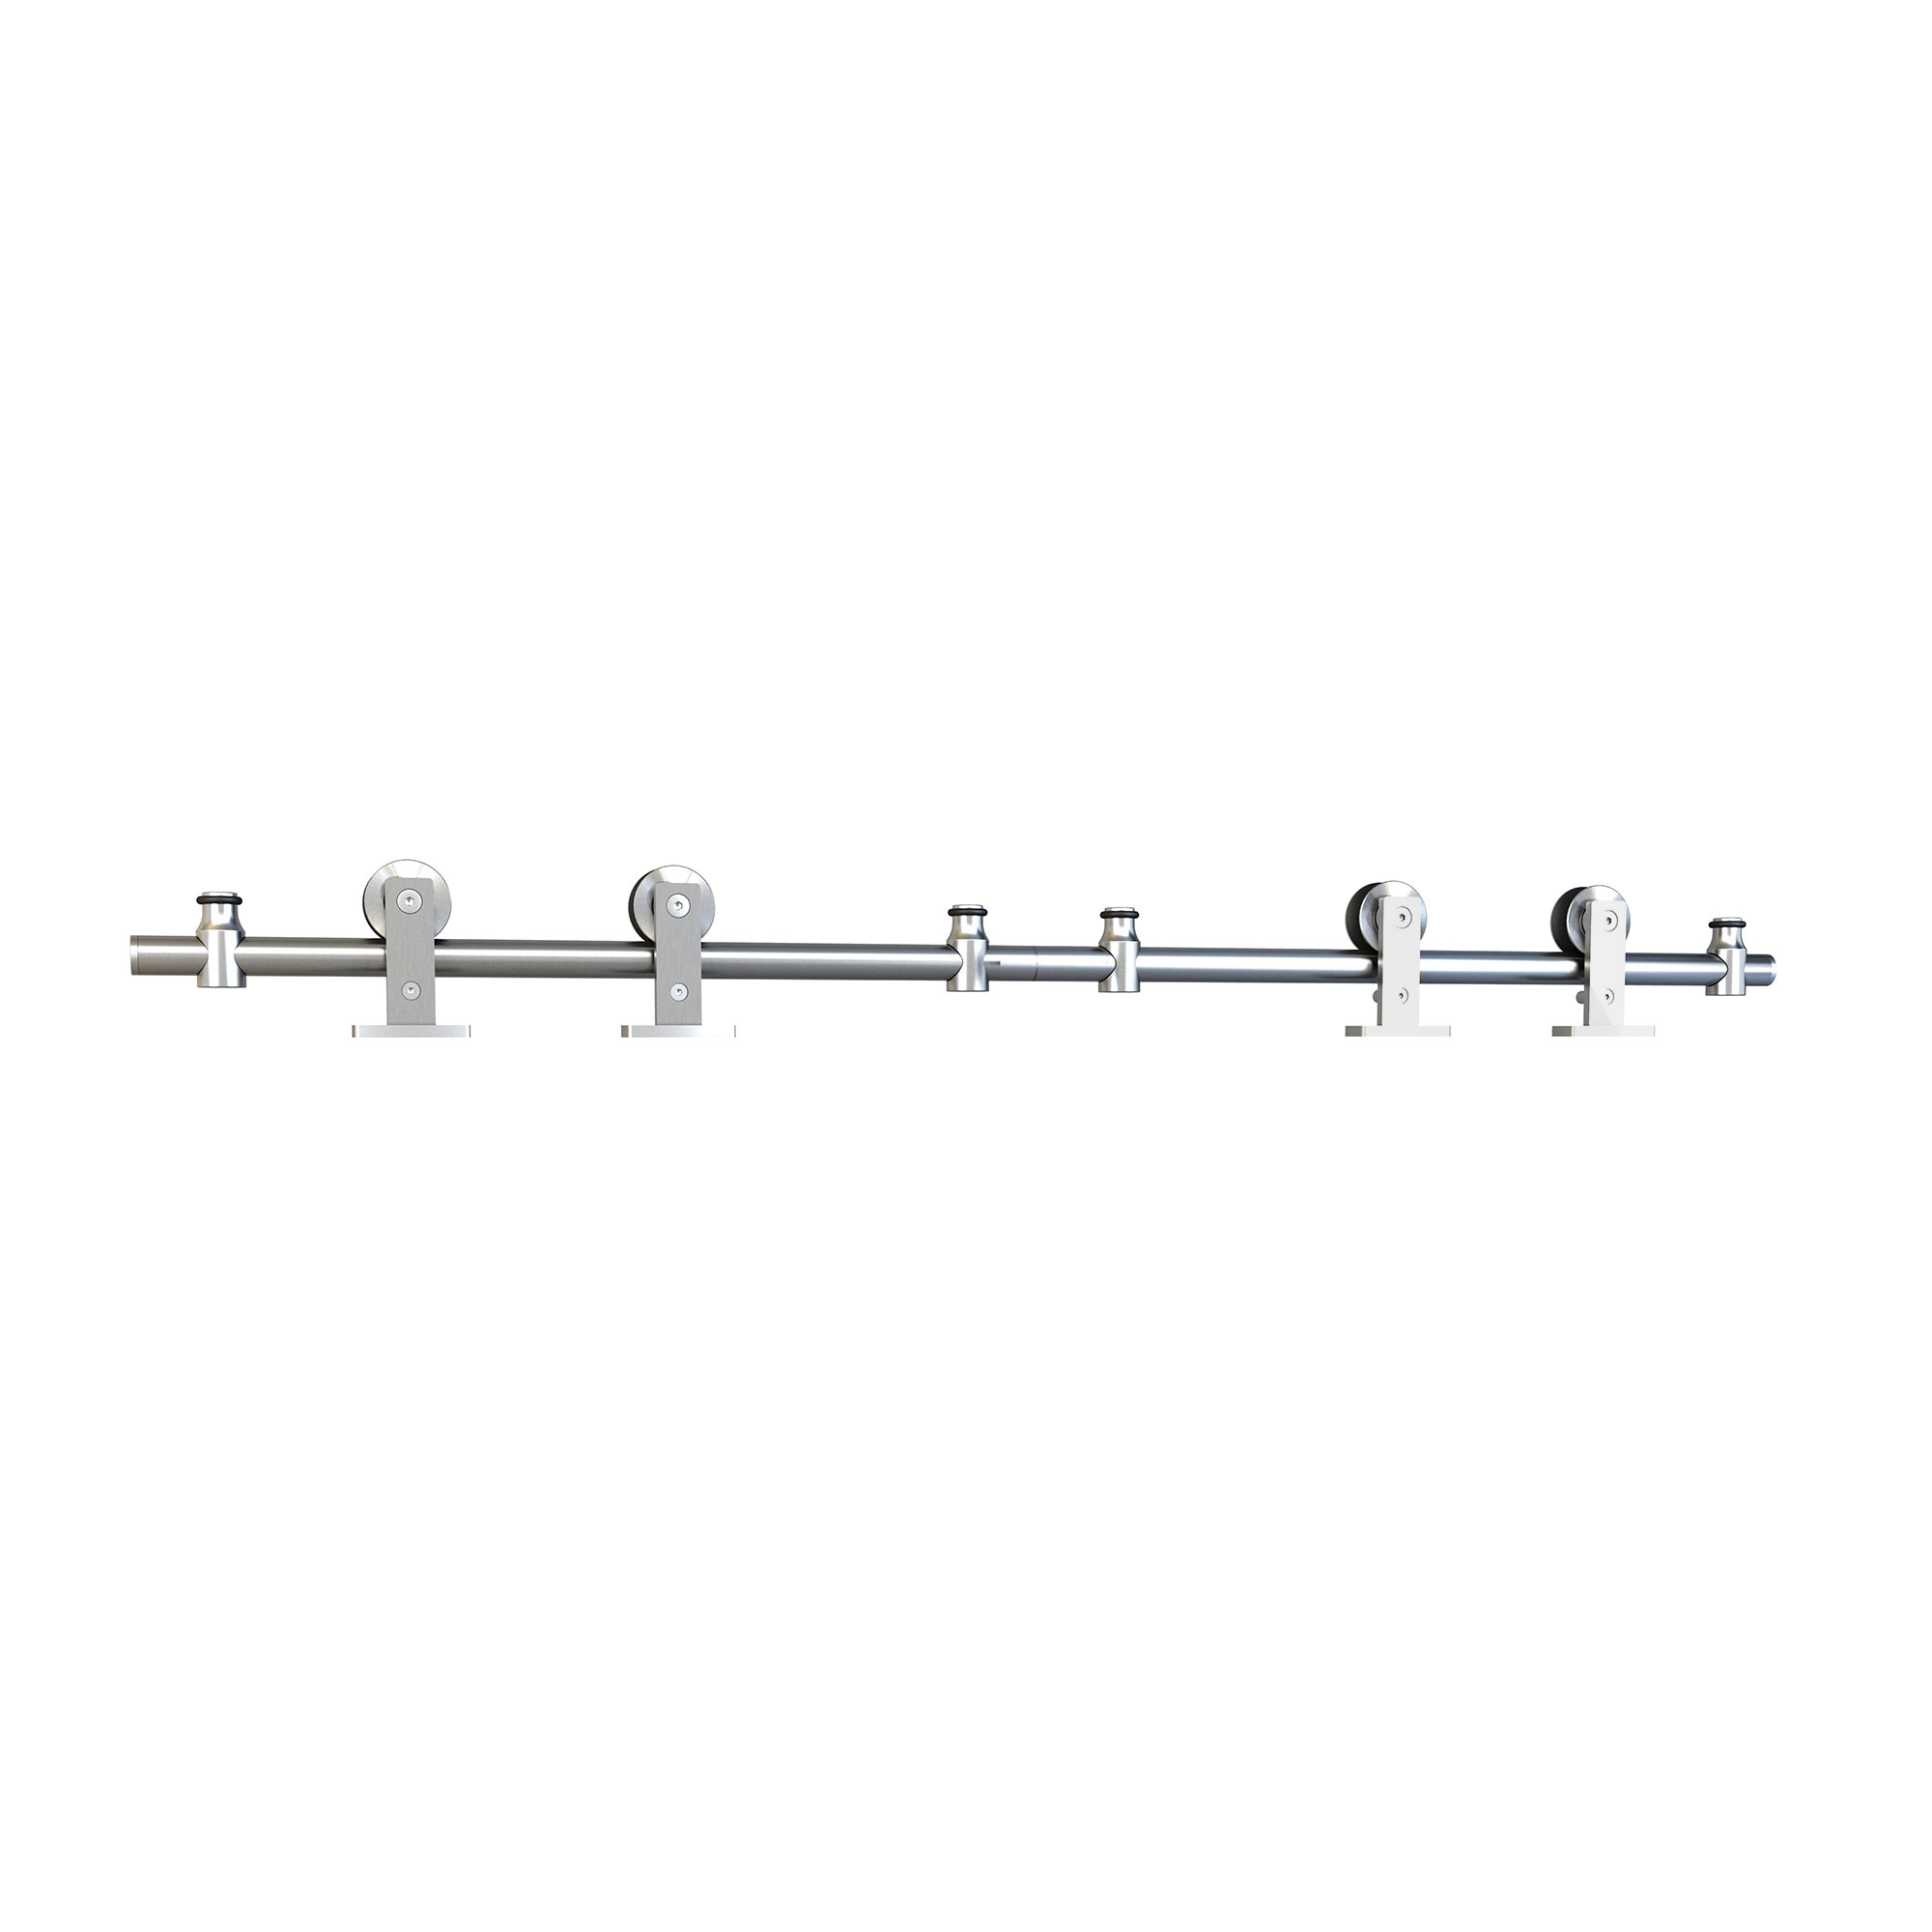 Architectural Products by Outwater Barn Door Stainless Steel-304 Grade-Sliding Rolling Barn Door Hardware Kit for Double Wood Doors with Routed Floor Guides - image 3 of 6